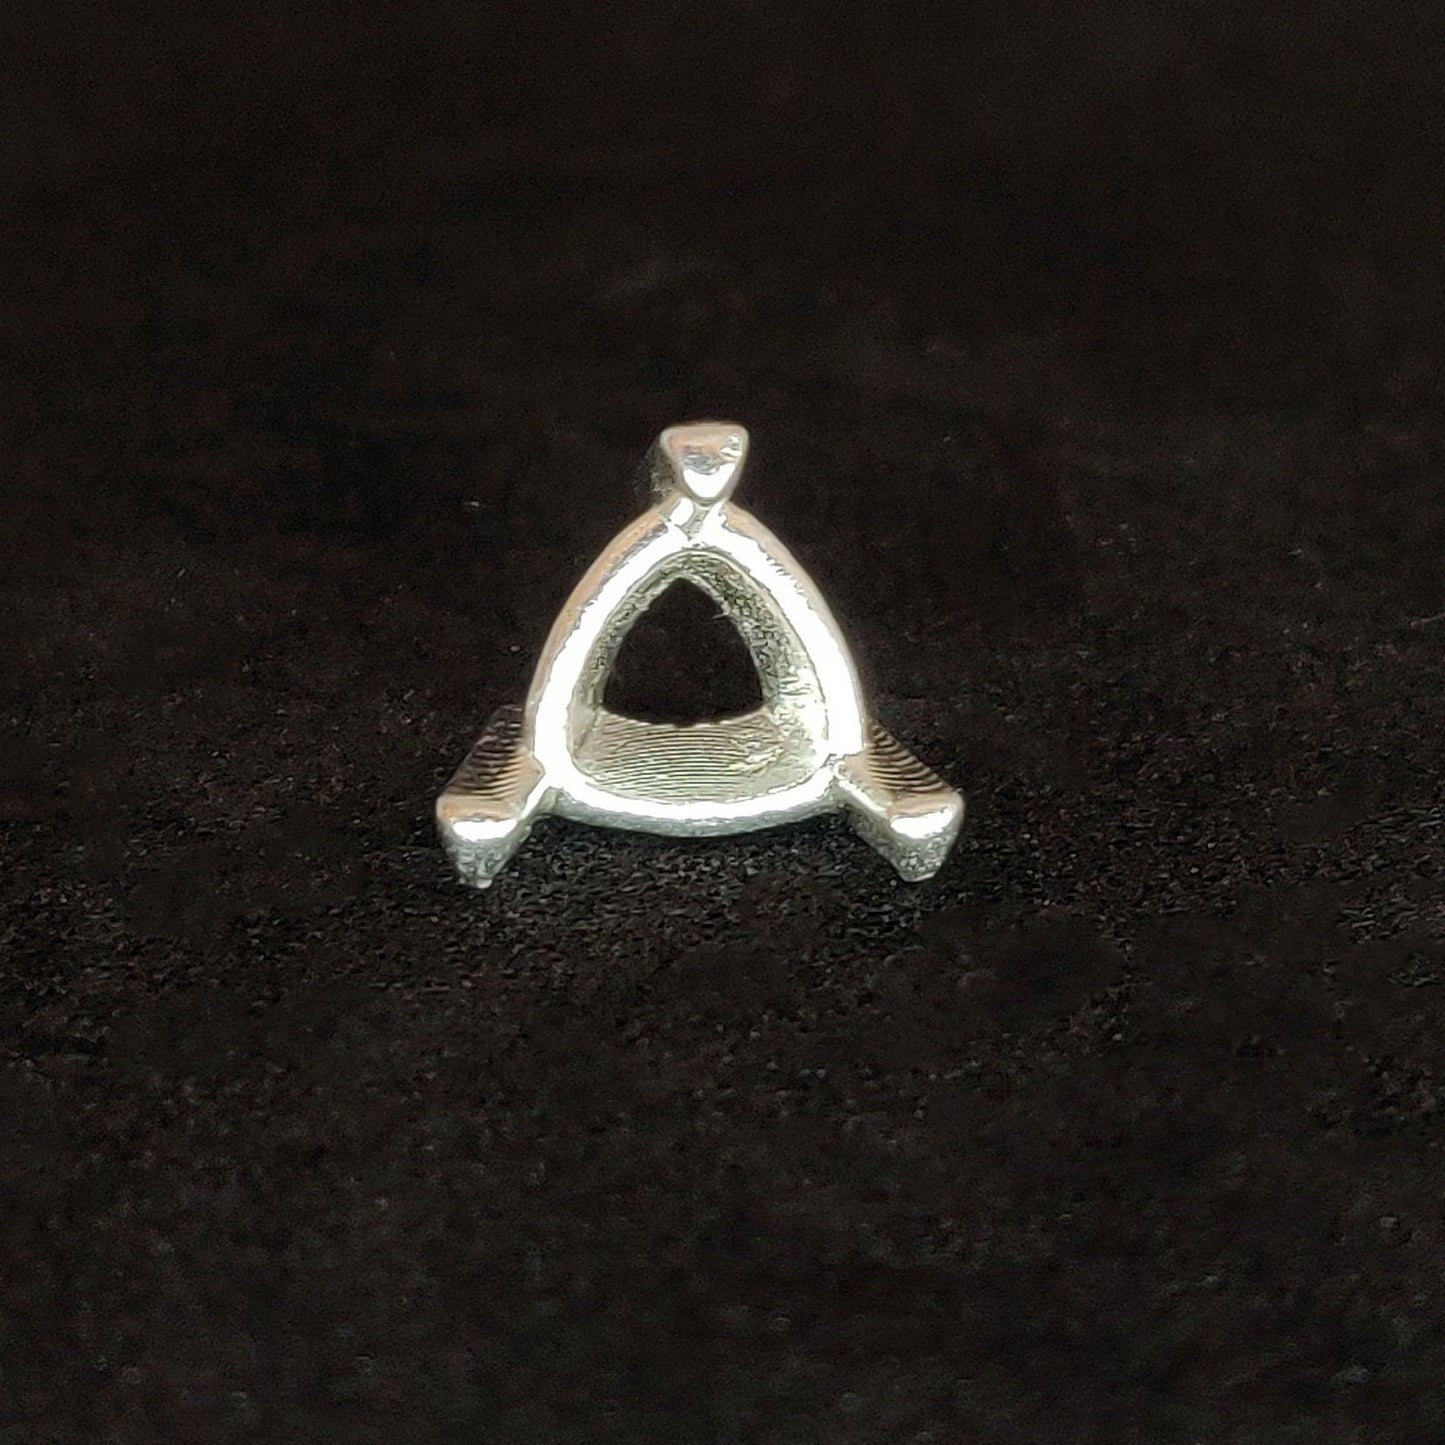 6x6m Silver Trillion Cut Gemstone Claw Setting. 9ct Gold Trillion Prong Setting. Jewelry Making Supplies. Make Your Own Jewelry.